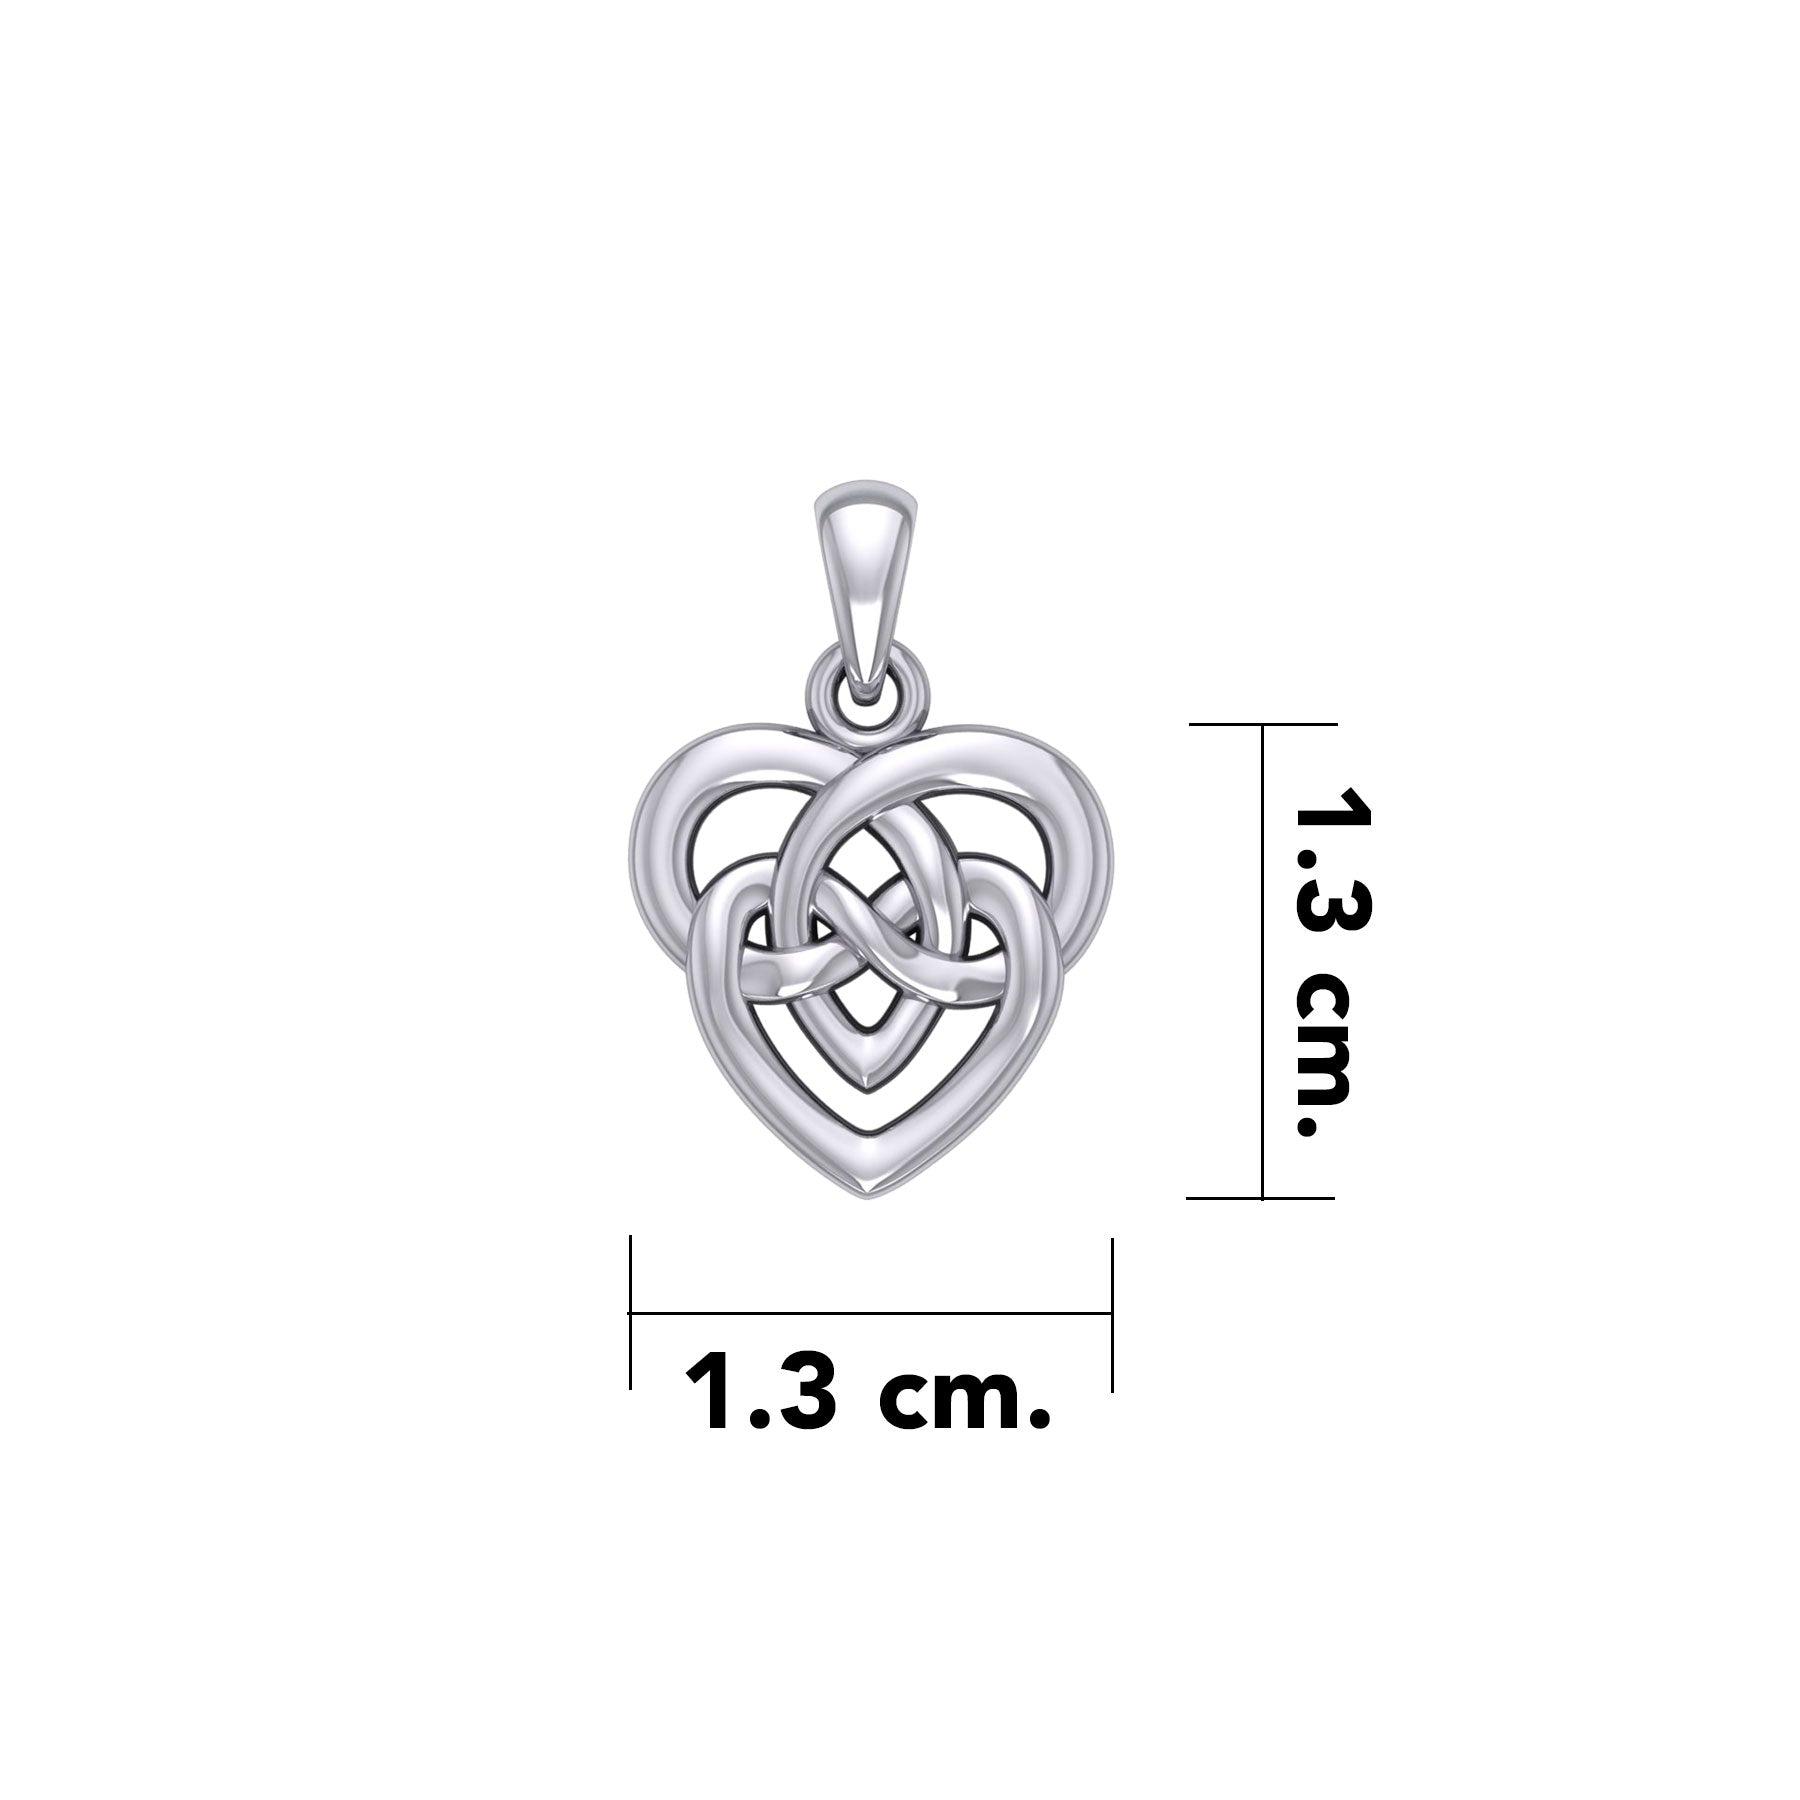 Celtic Infinity Knotwork Heart Silver Pendant TPD6020